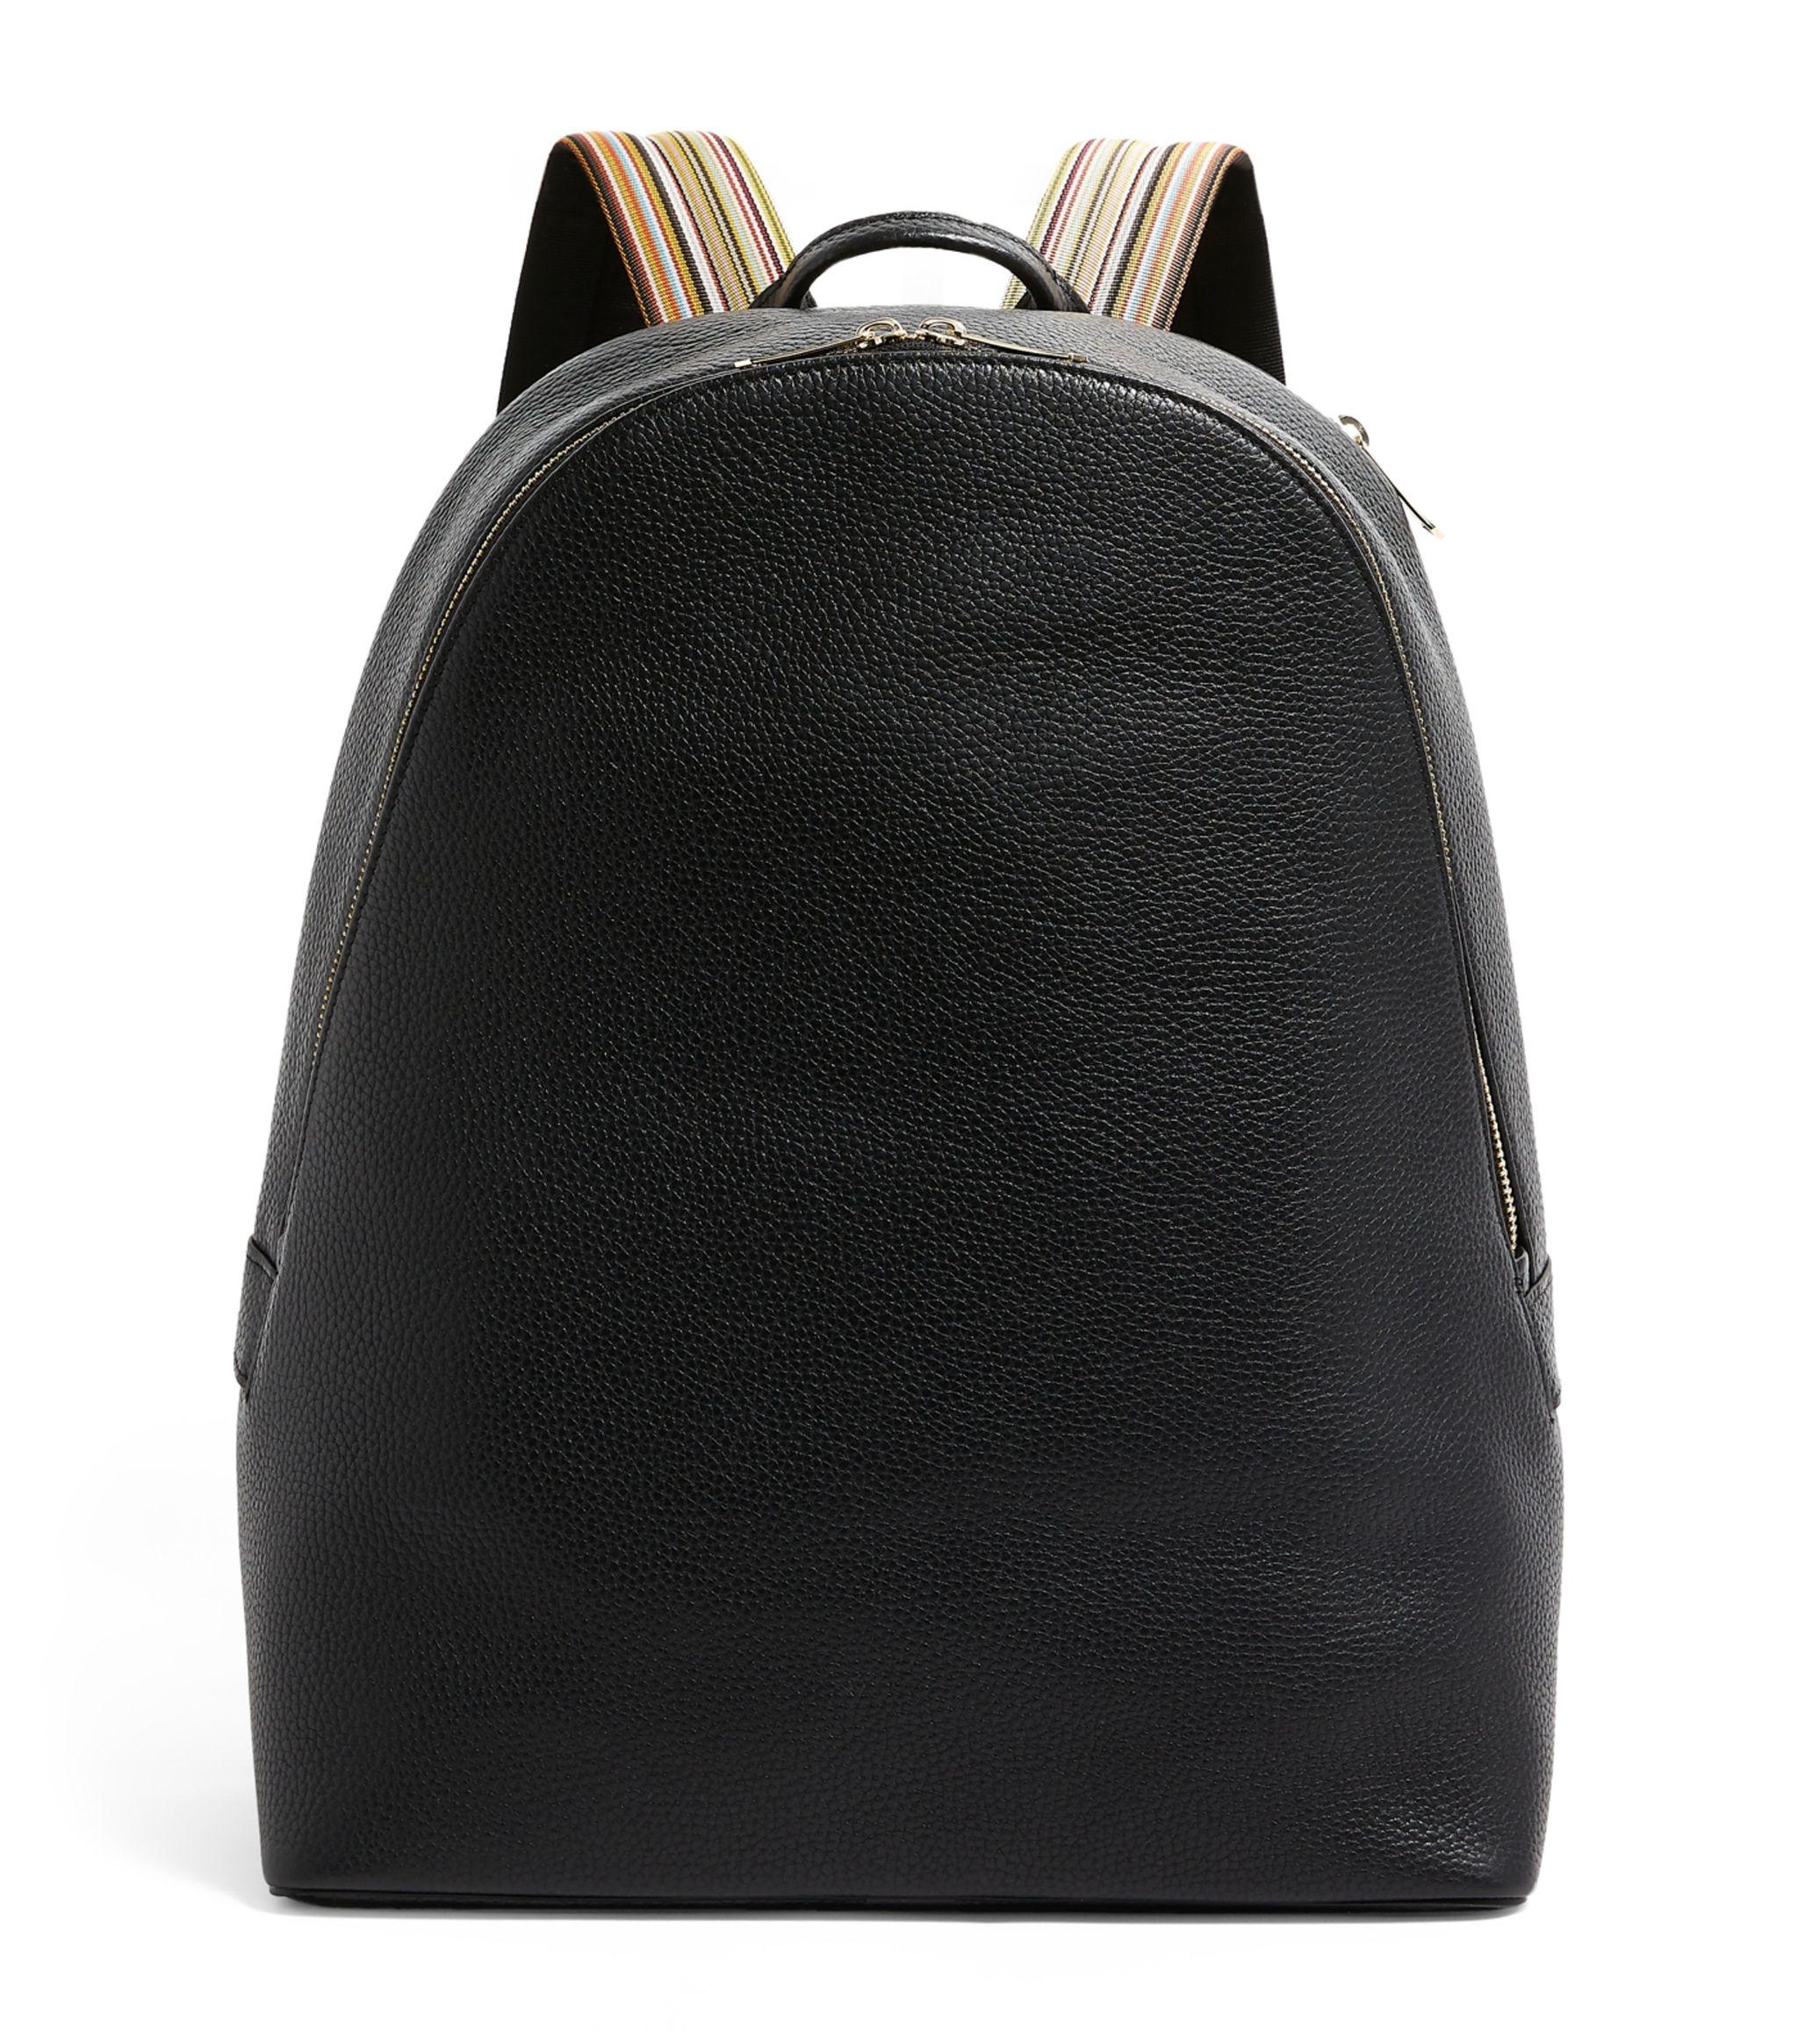 Paul Smith Leather Signature Stripe Backpack in Black for Men - Lyst